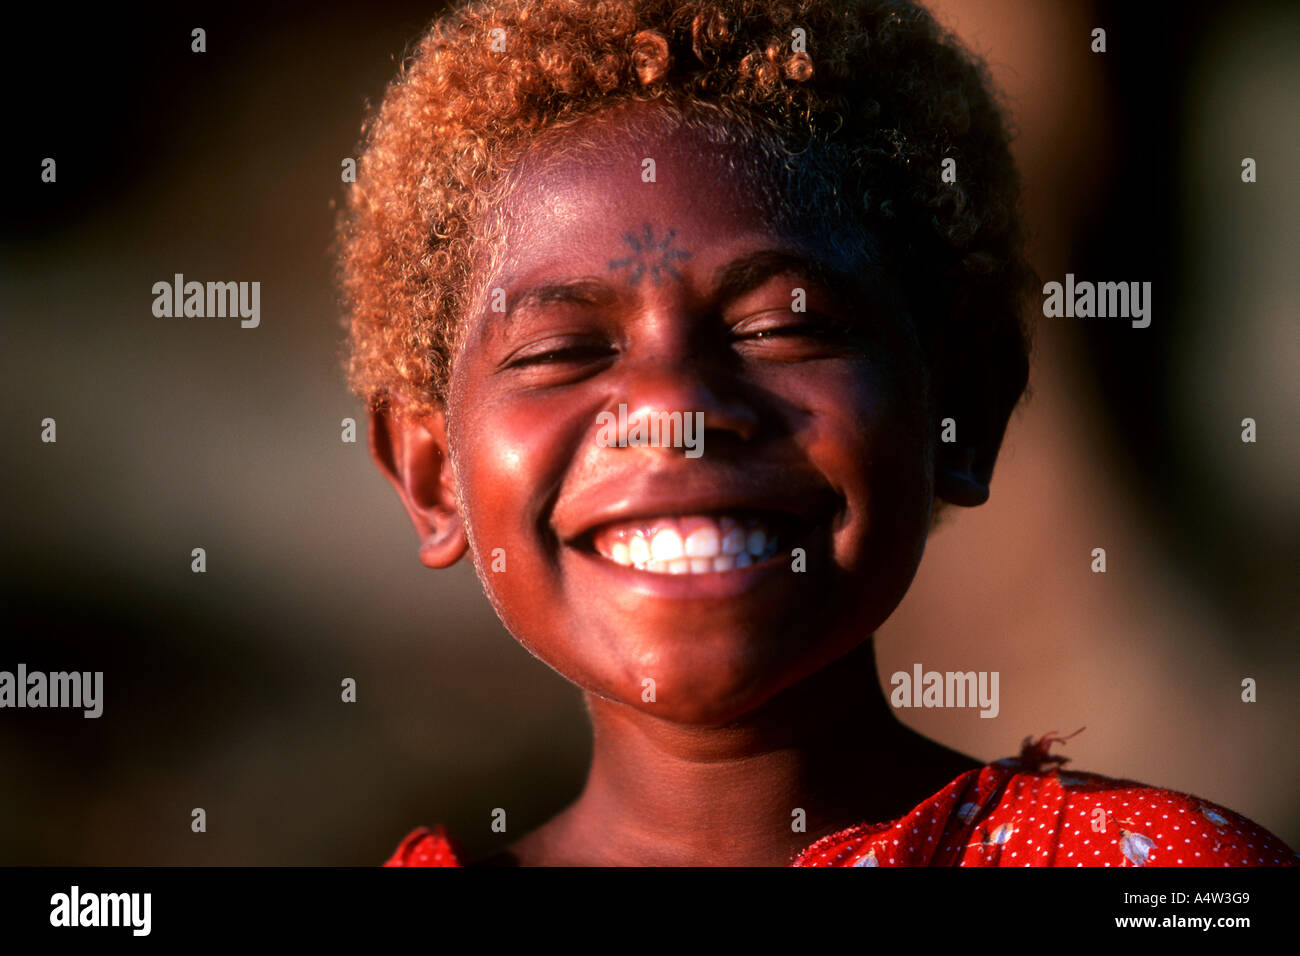 Linette a young girl from Tembin village on the West Coast of <b>New Ireland</b> ... - linette-a-young-girl-from-tembin-village-on-the-west-coast-of-new-A4W3G9